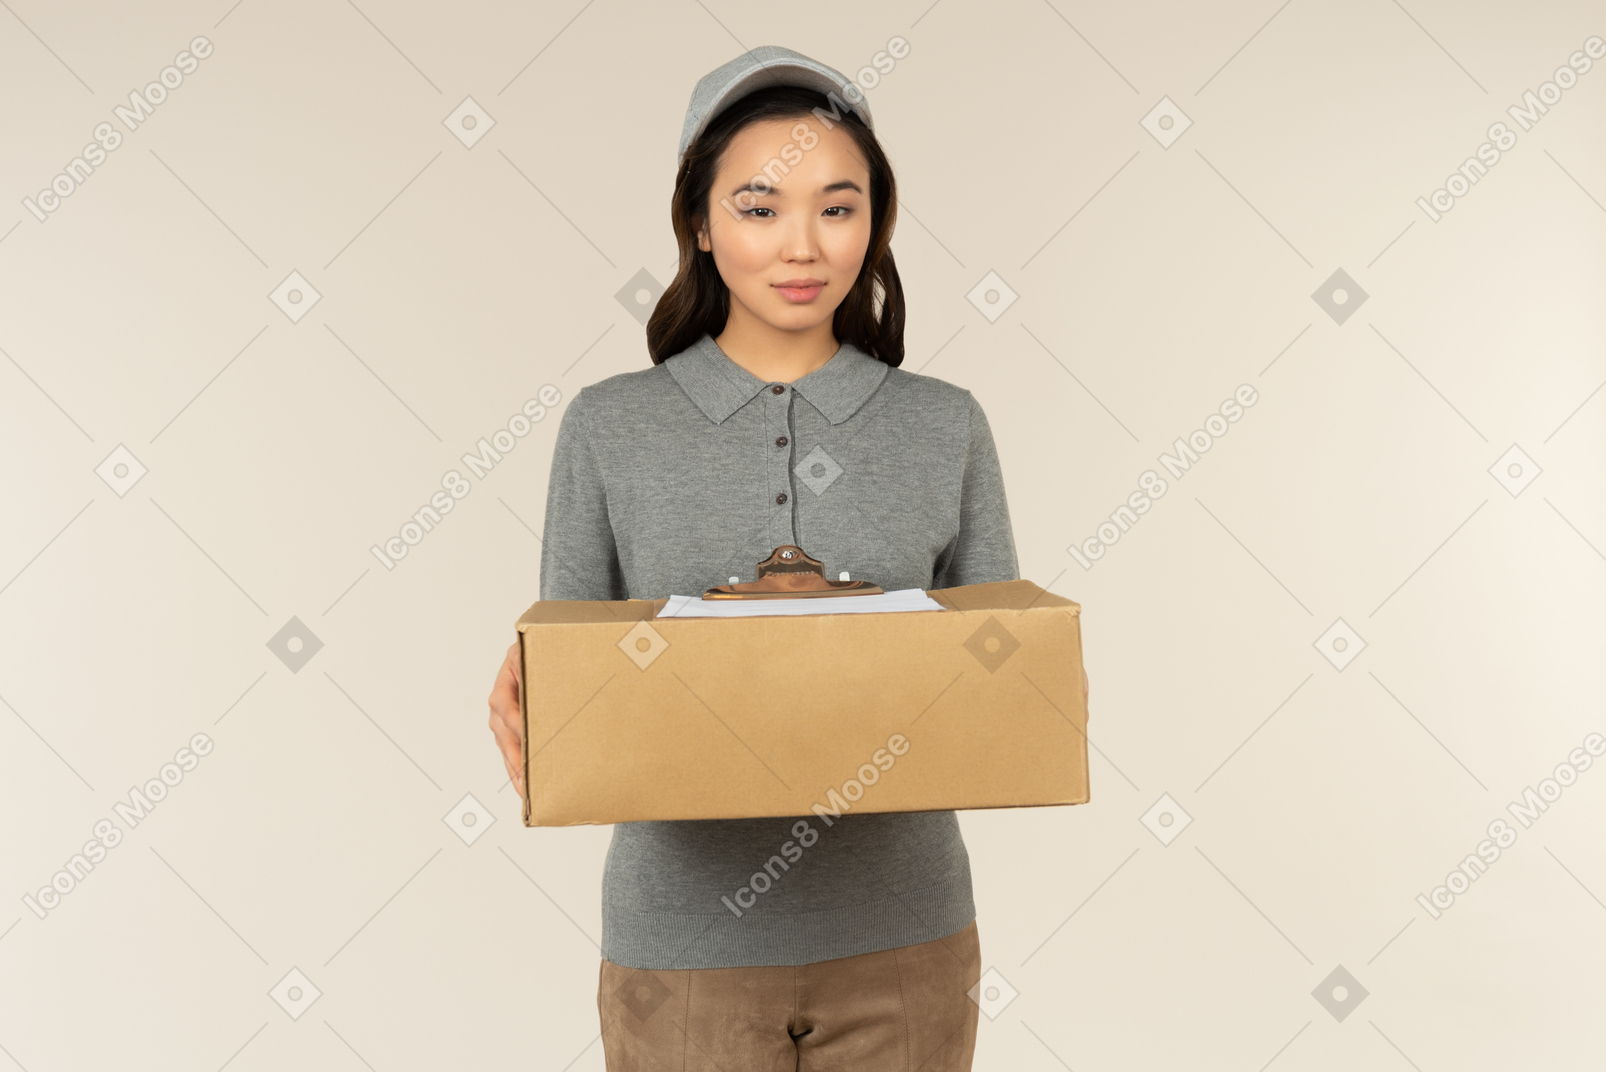 Here you have your package